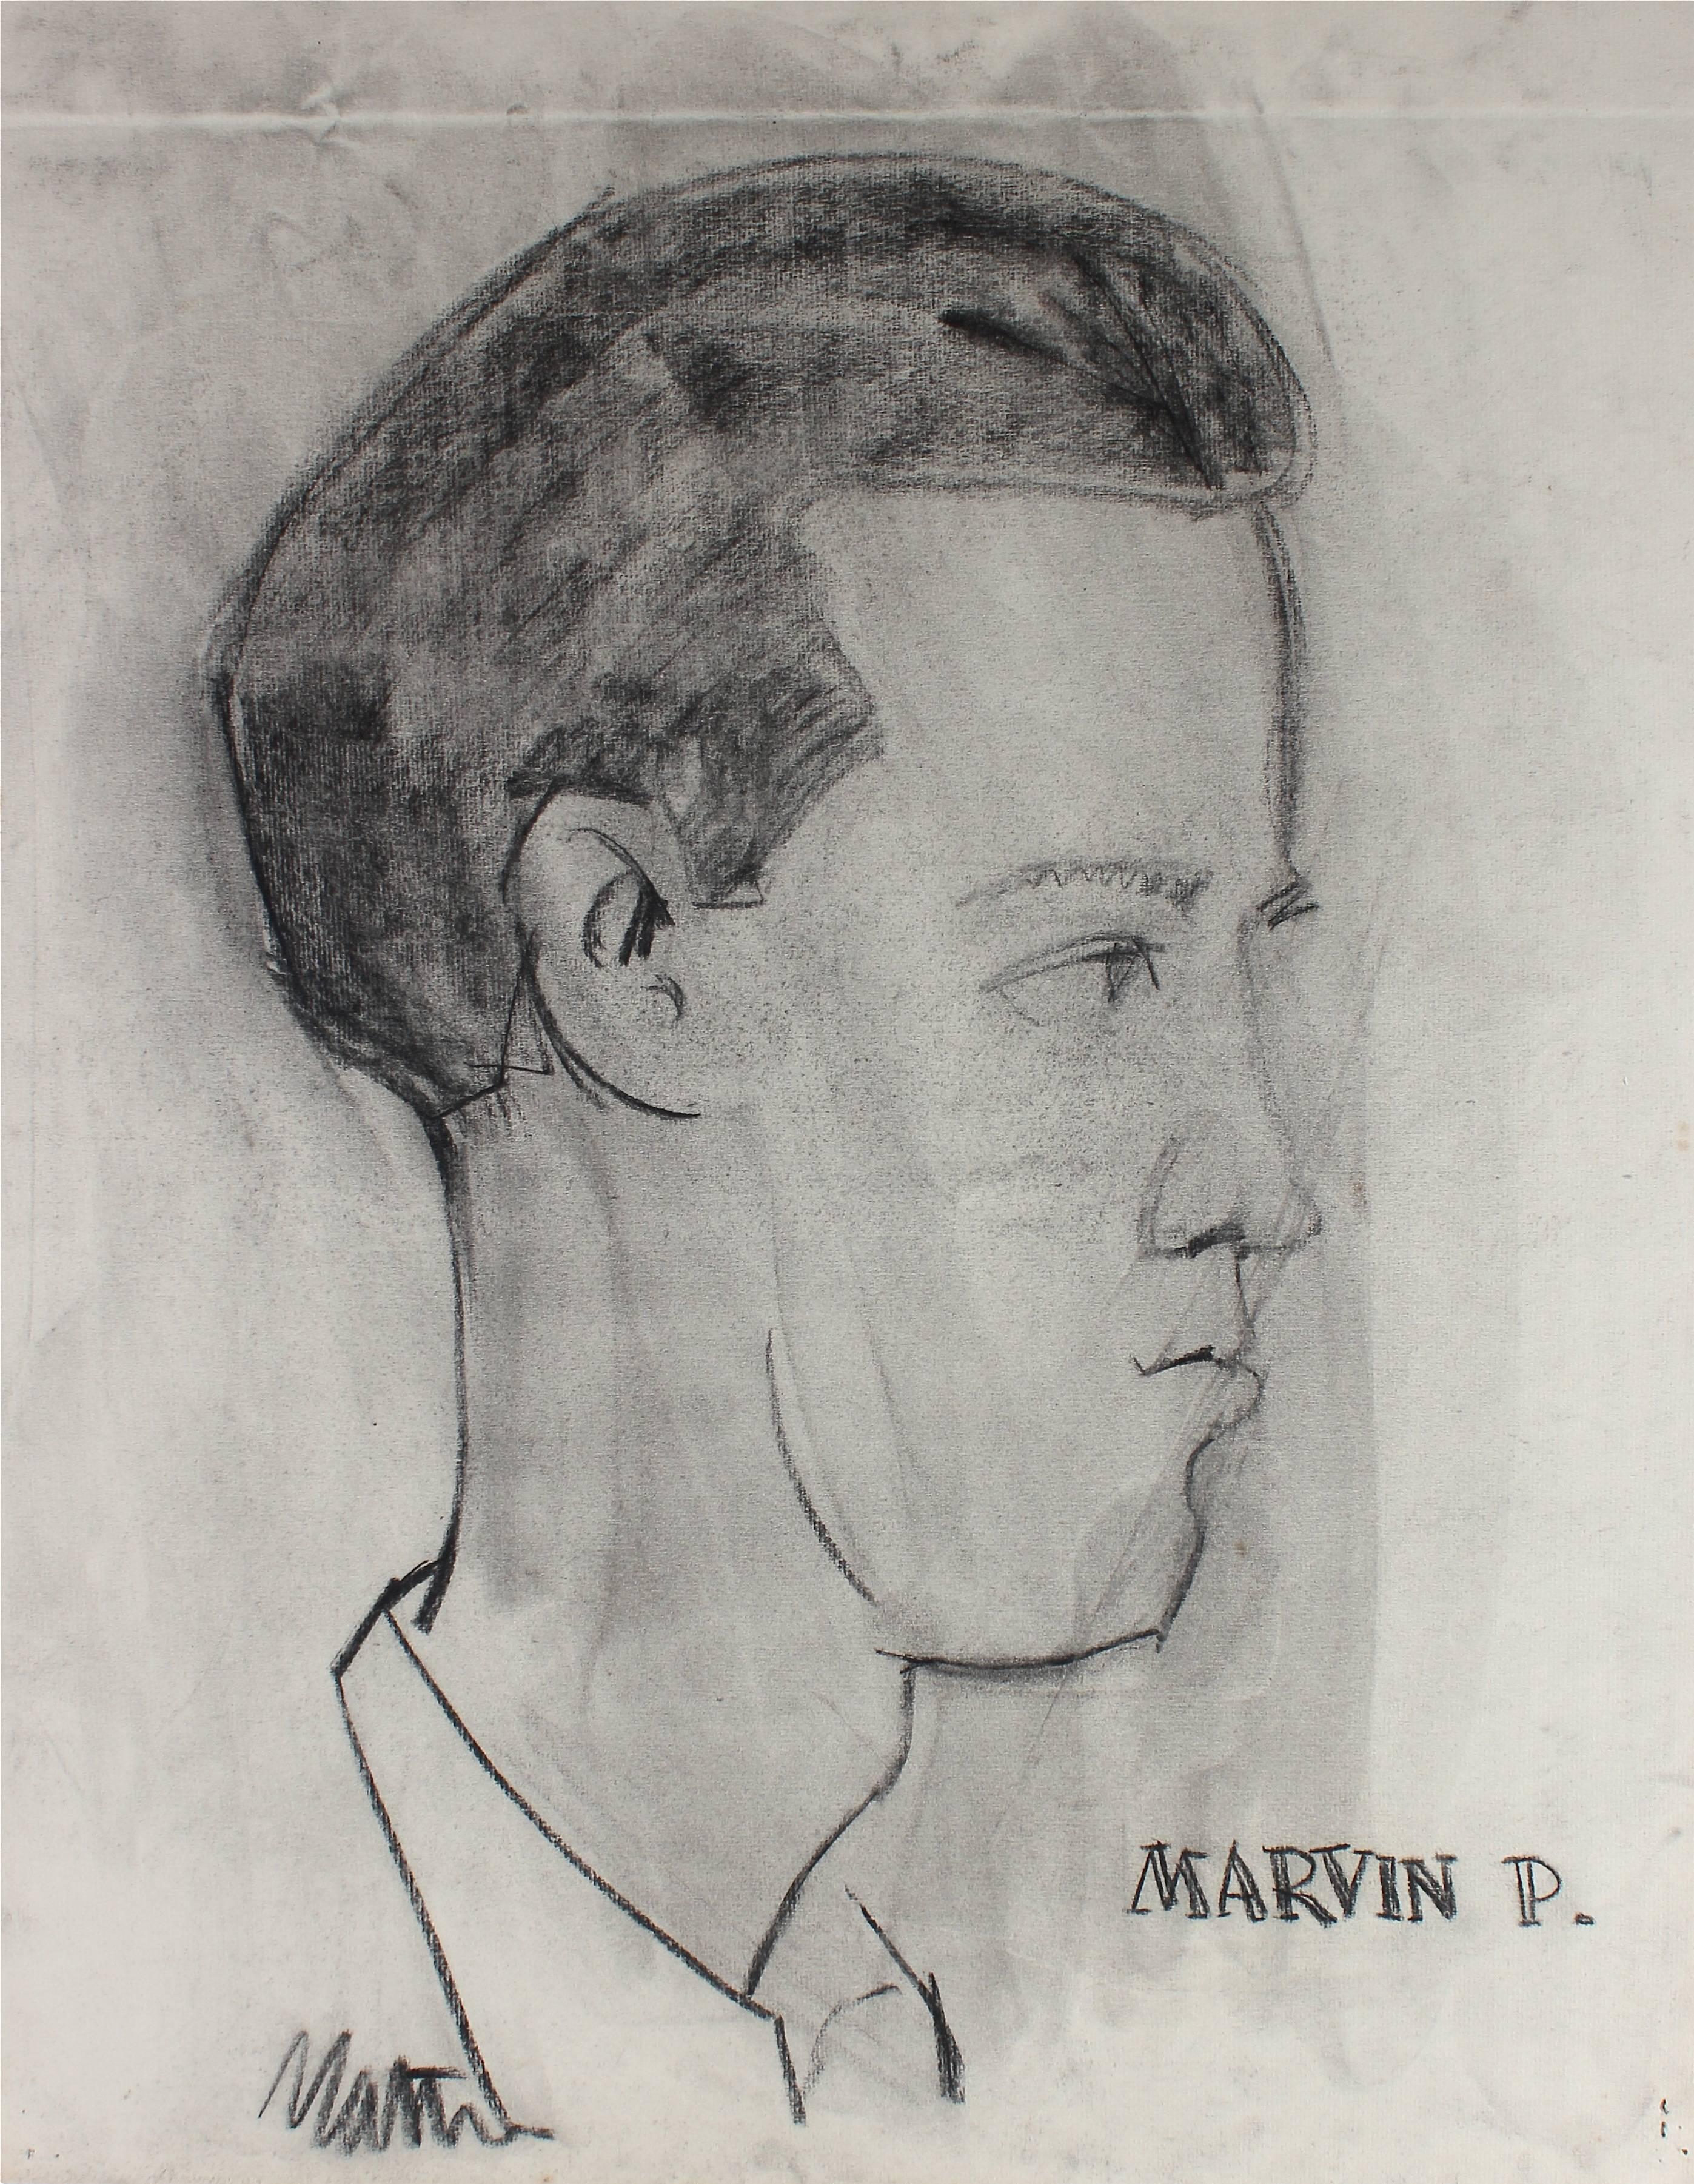 "Marvin P." Monochromatic Portrait Illustration of a Man in Charcoal, Circa 1945